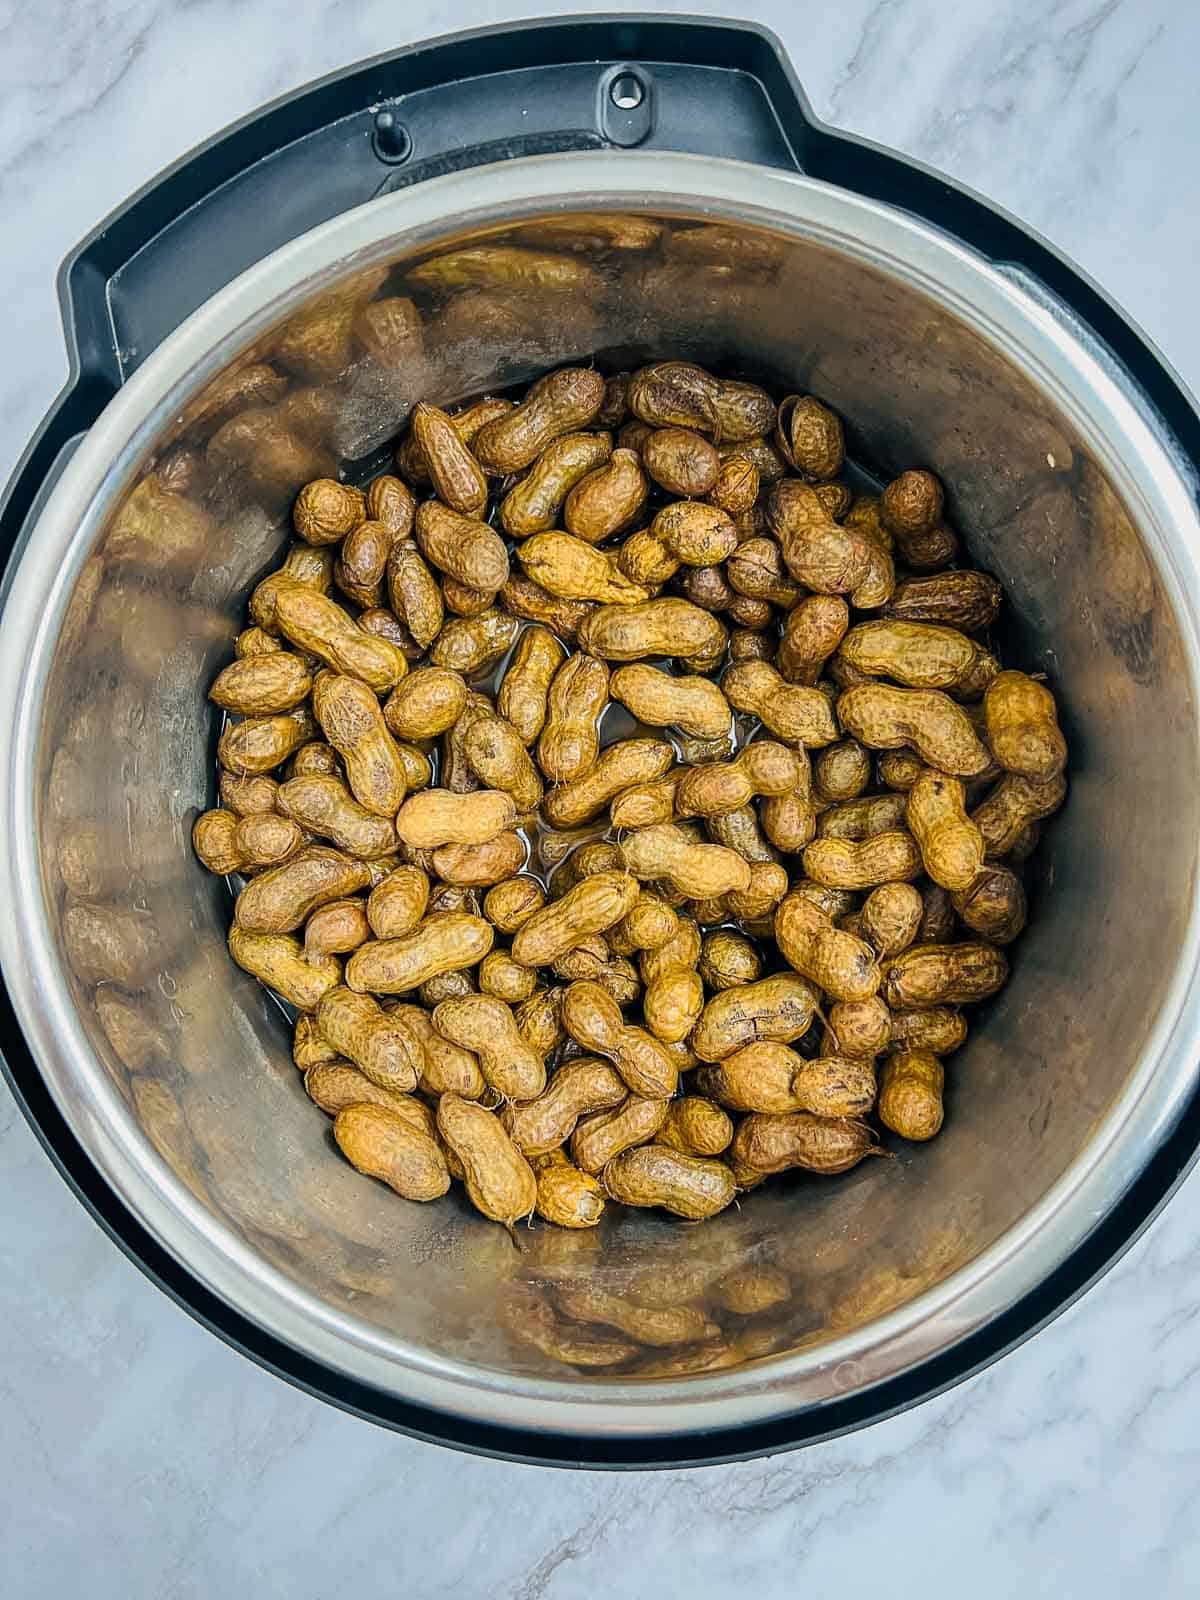 Cooked unshelled peanuts in the Instant Pot.